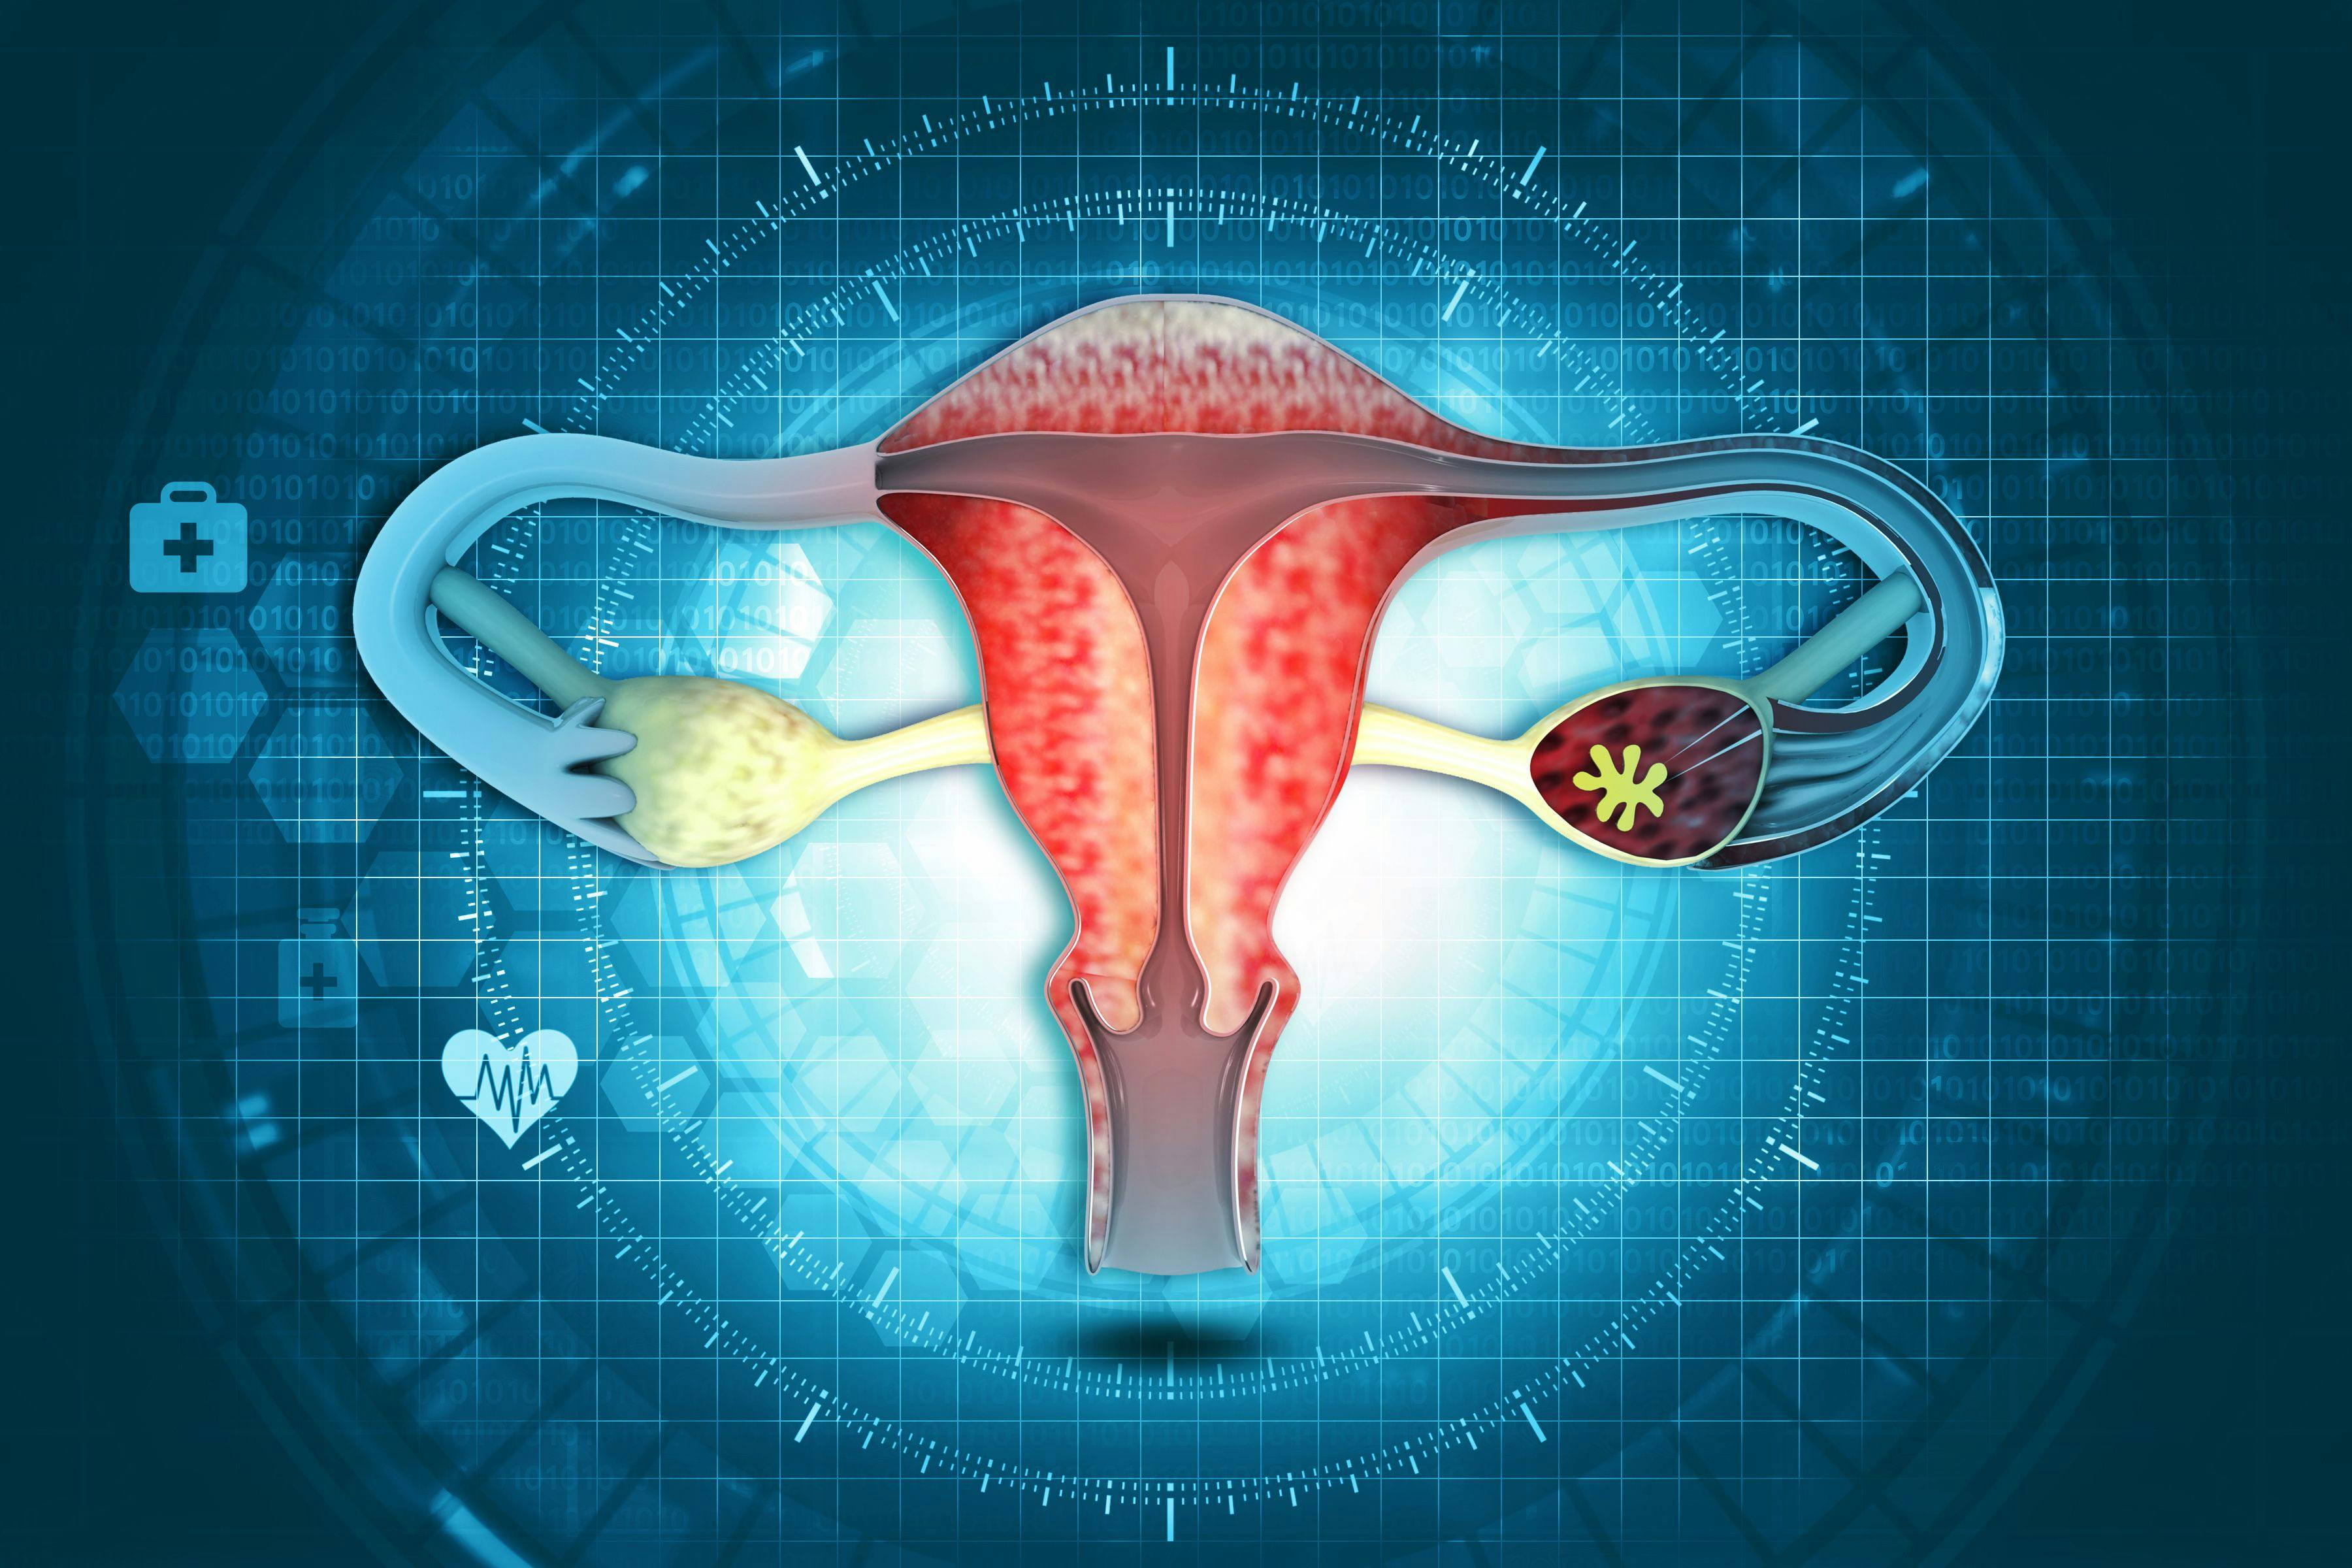 Radiofrequency ablation of uterine fibroids